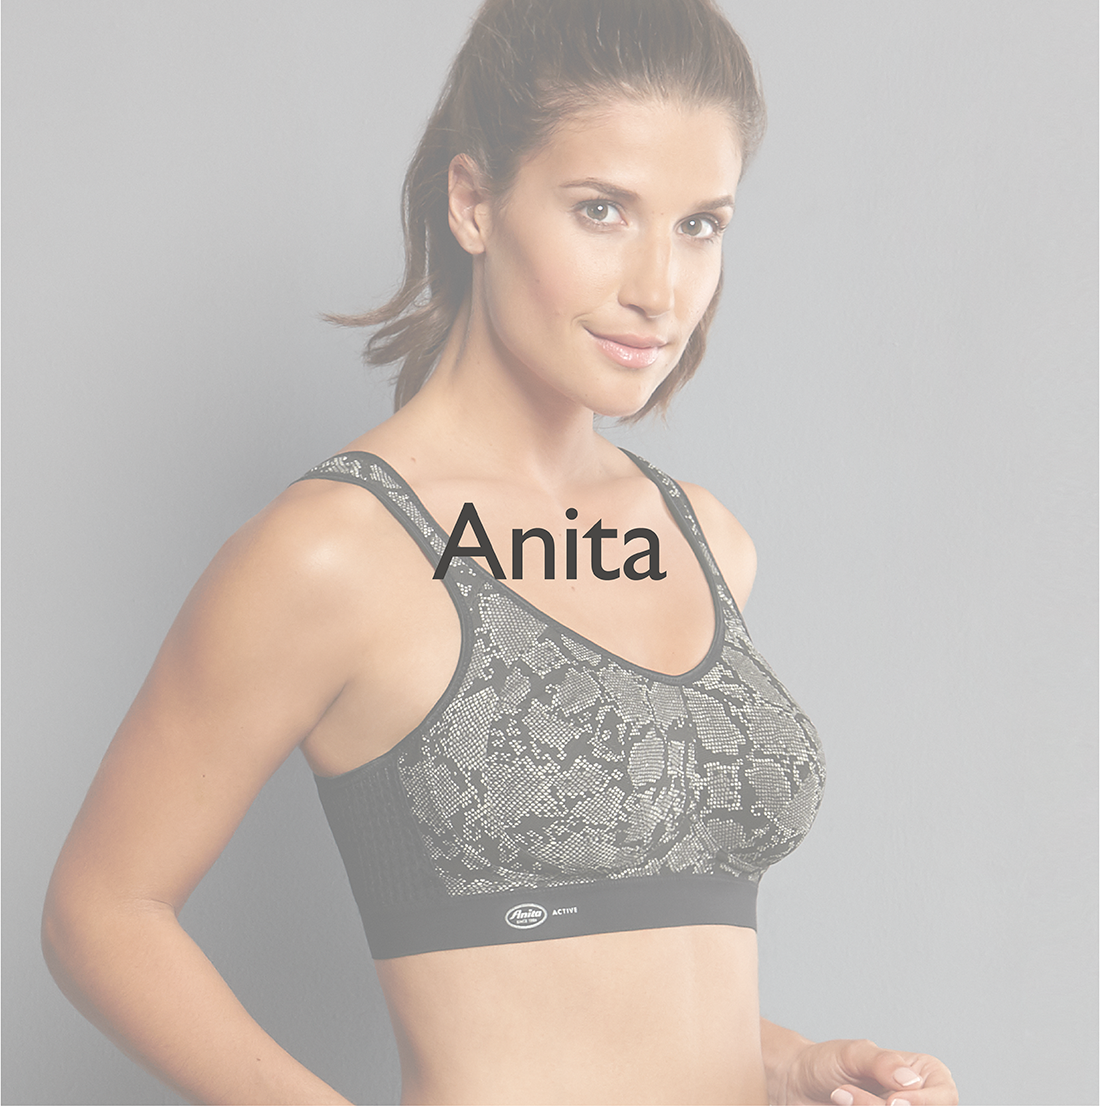 Pink Corset Clear Bra Extender Black Gym Crop Top G Form Simply